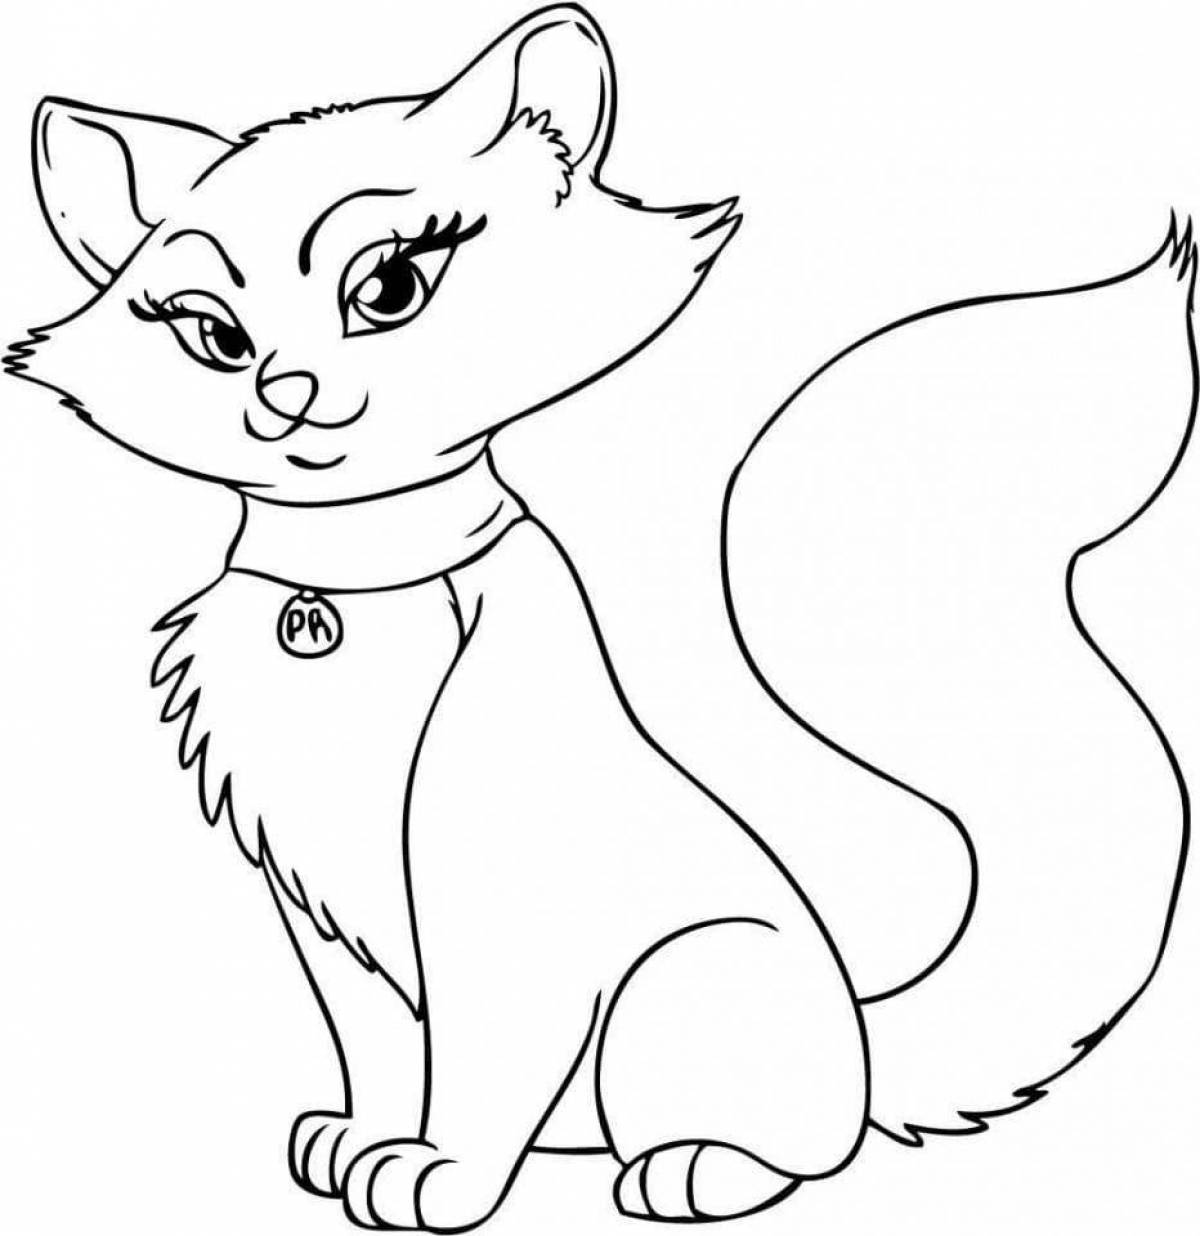 Felicity cat coloring page